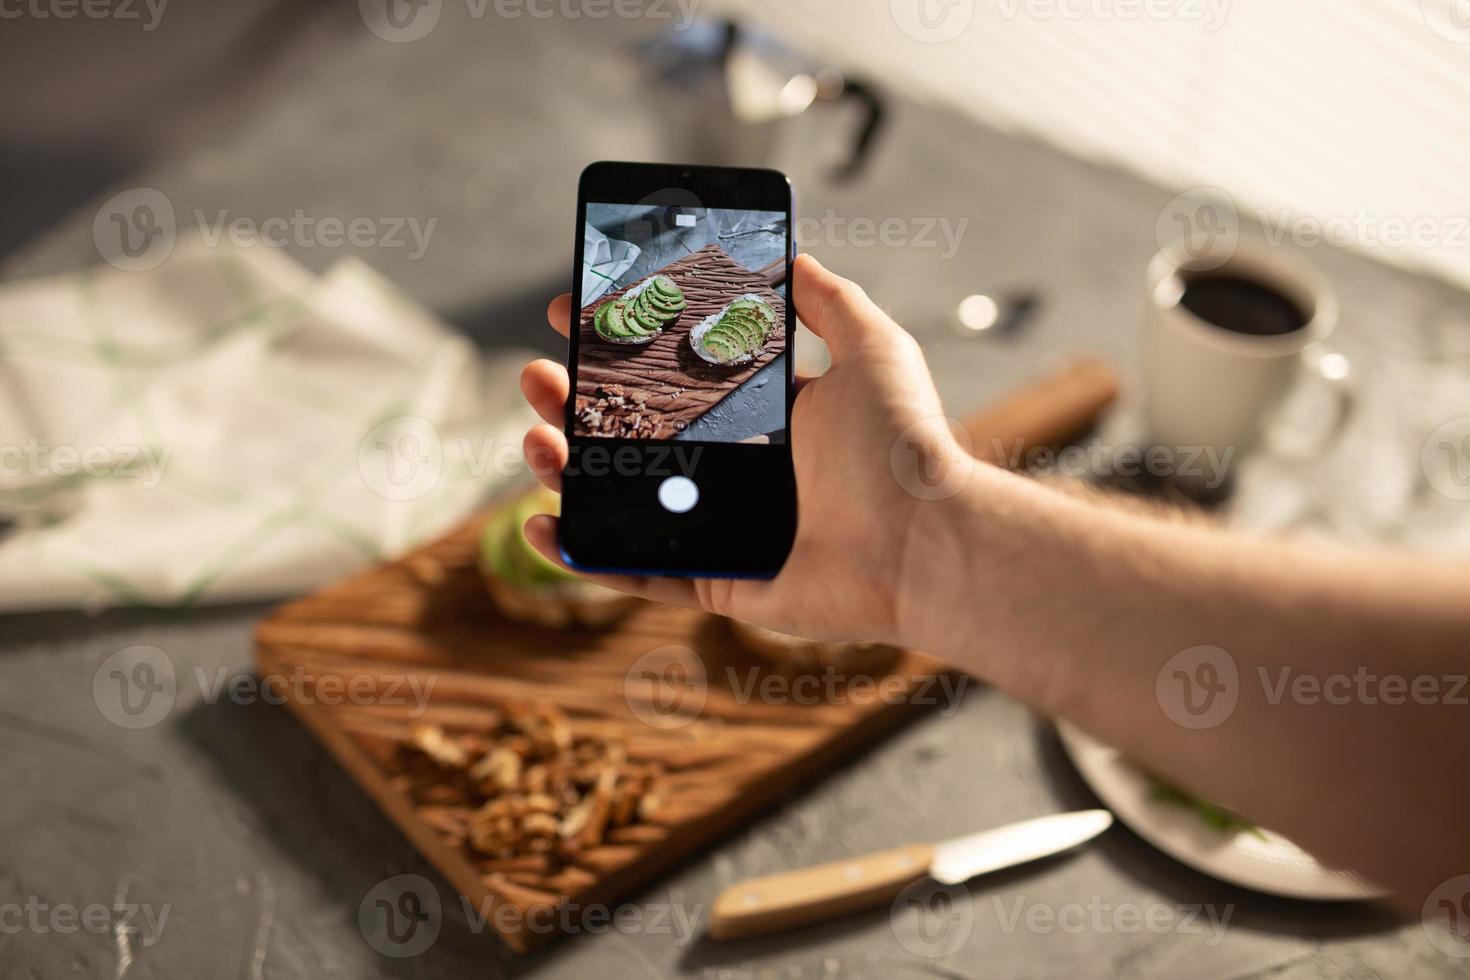 Hands take pictures on smartphone of two beautiful healthy sour cream and avocado sandwiches lying on board on the table. Social media and food concept photo